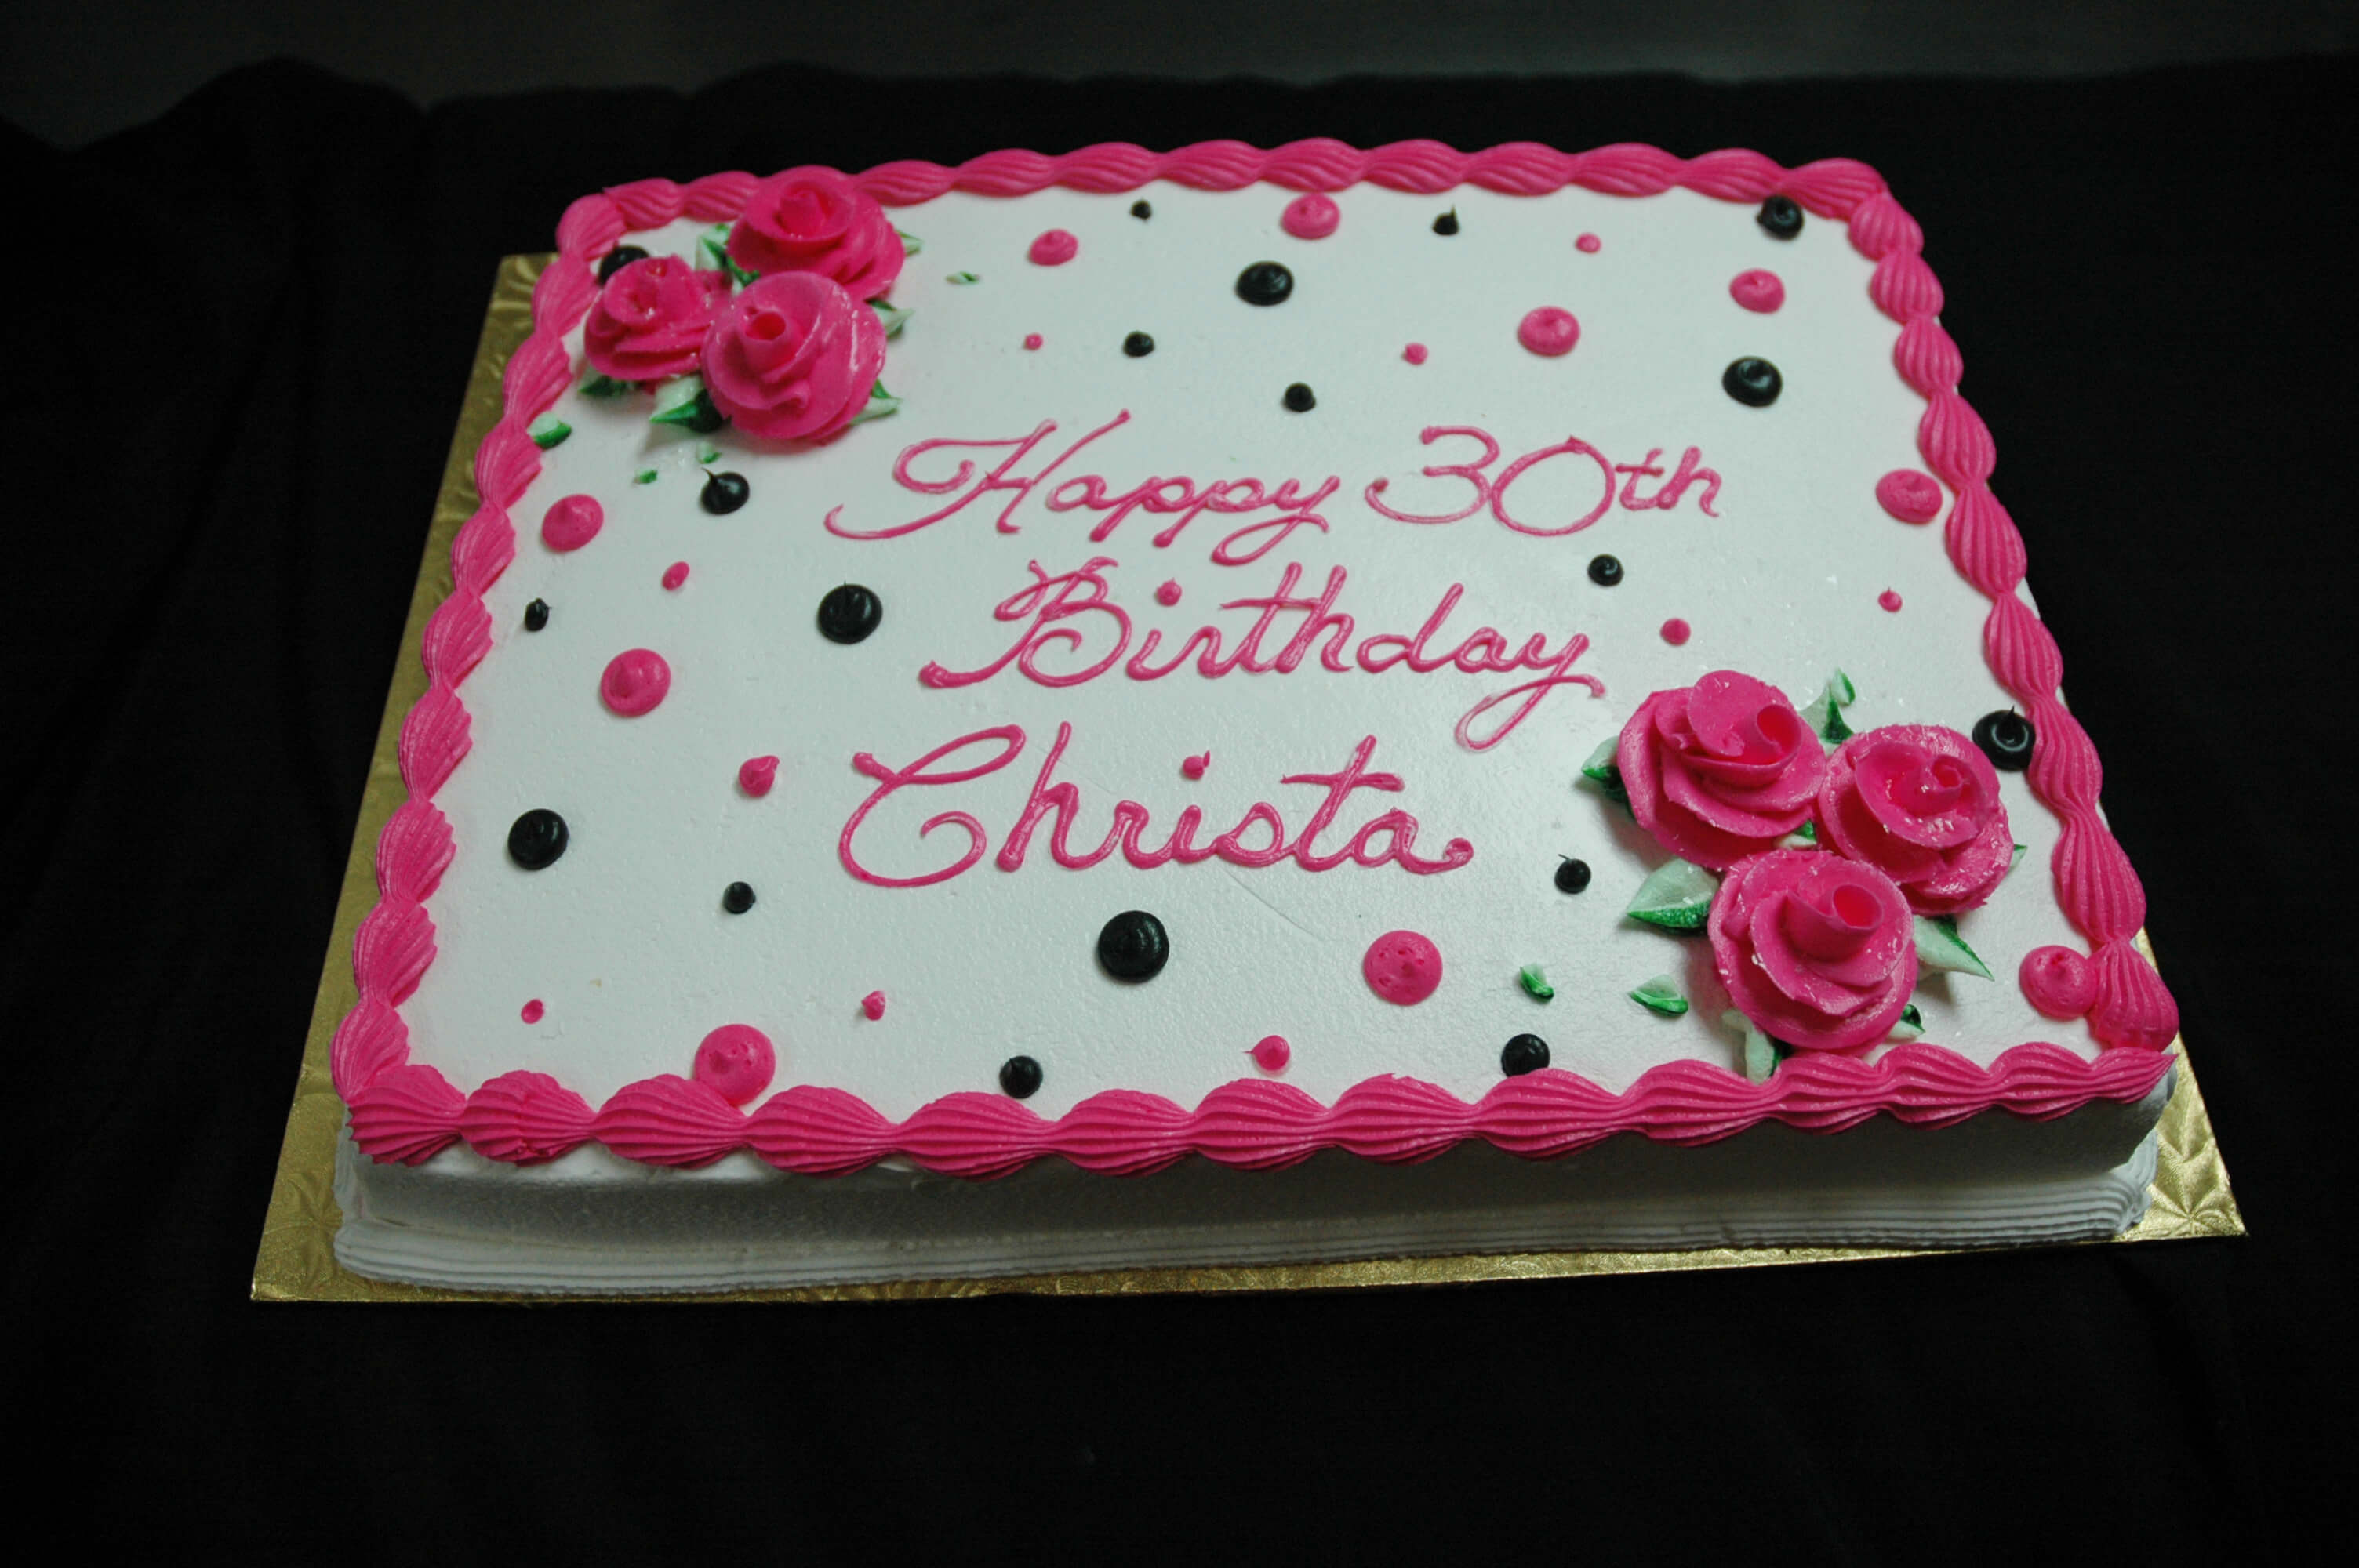 McArthur's Bakery Custom Cake with Pink Roses and Black and Pink Polka Dots